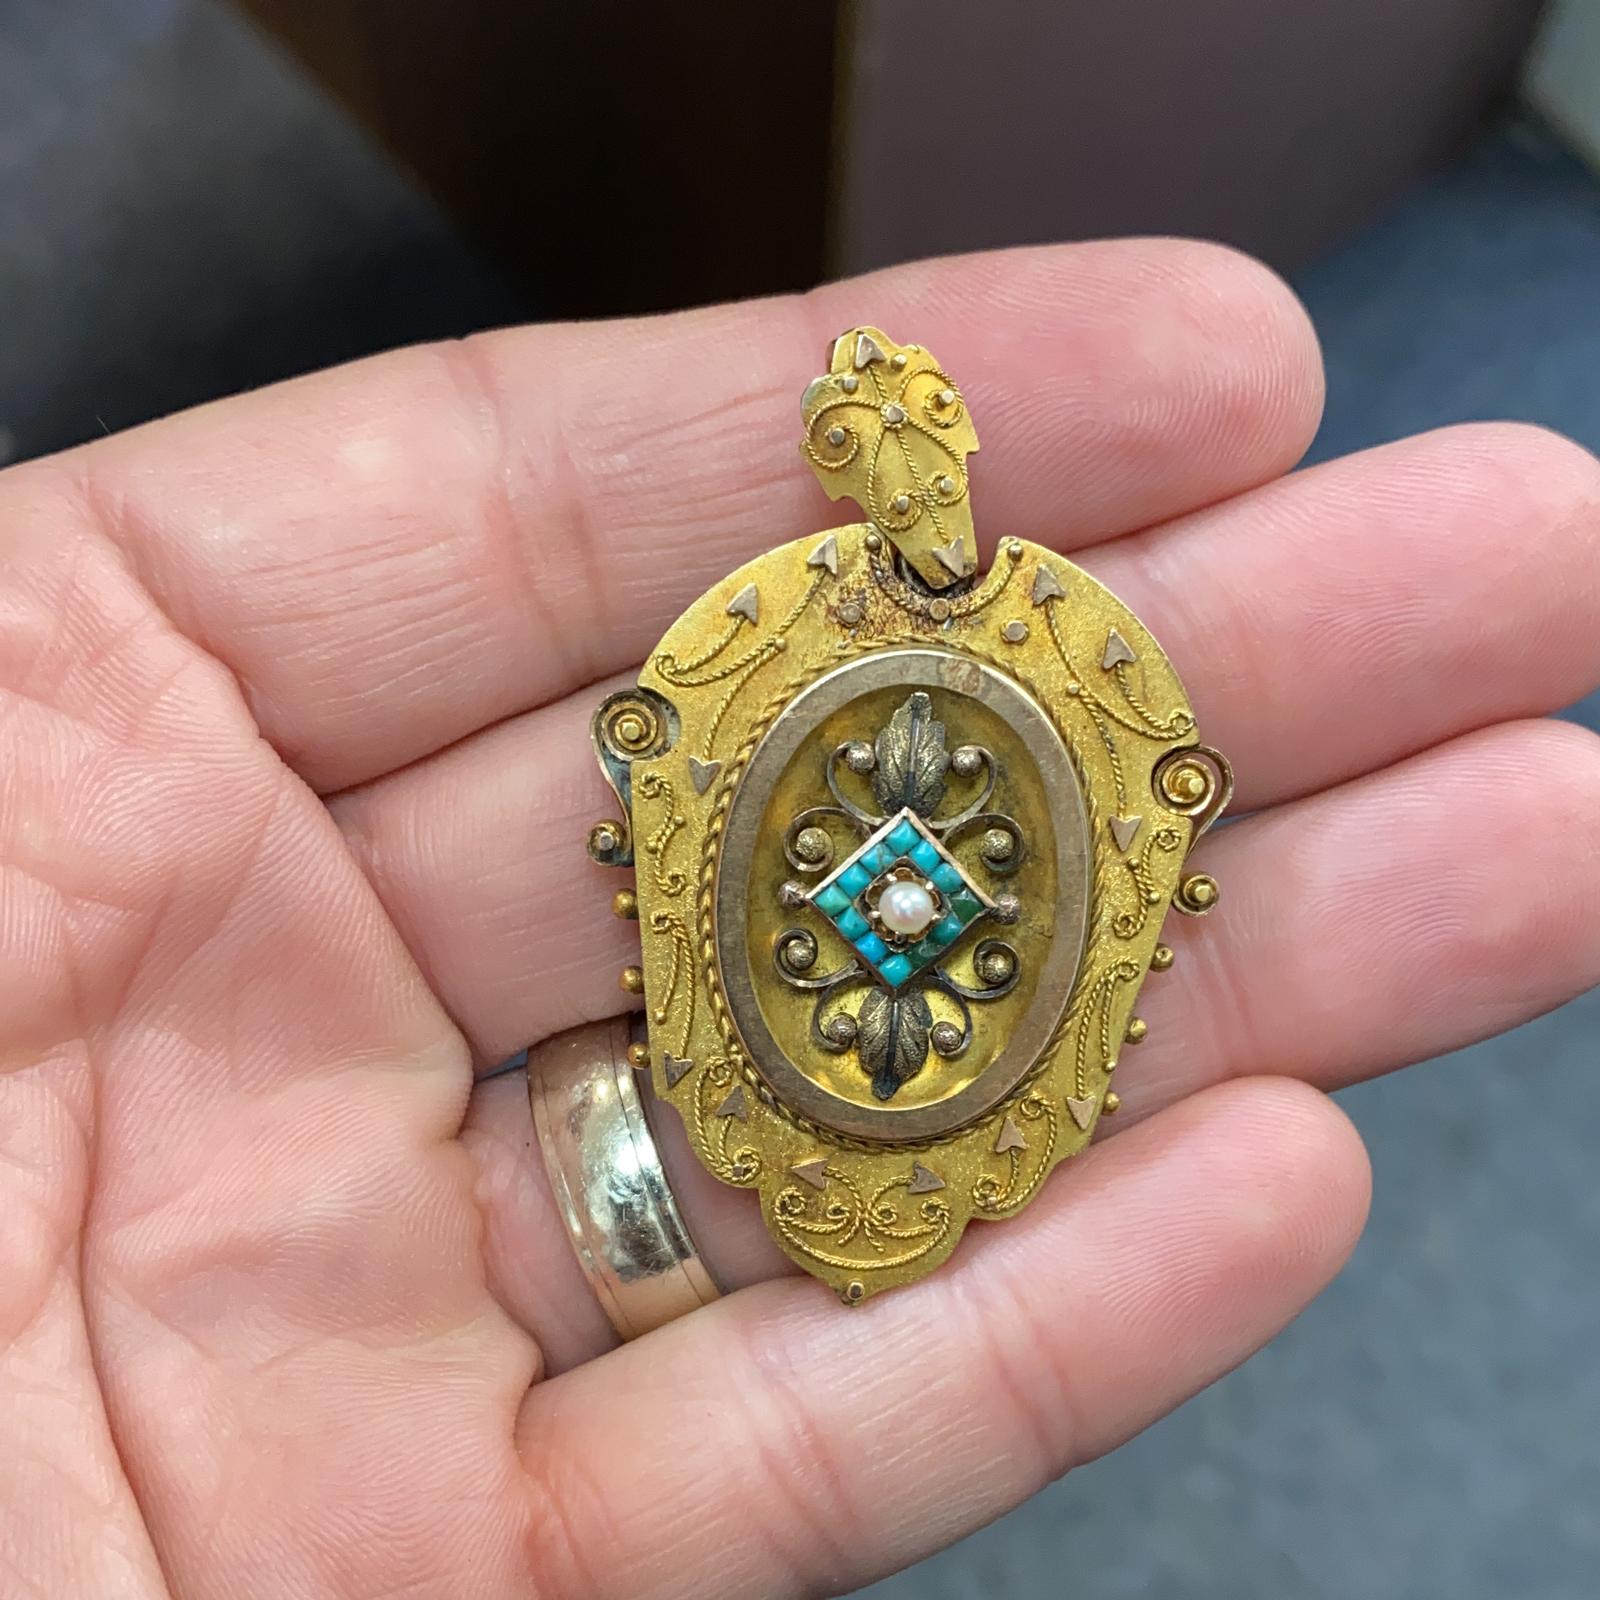 Original Victorian locket pendant fashioned in 18 karat yellow gold. The hand crafted pendant features turquoise and seed pearl accents, and measures 2.25 x 1.50 inches. 
